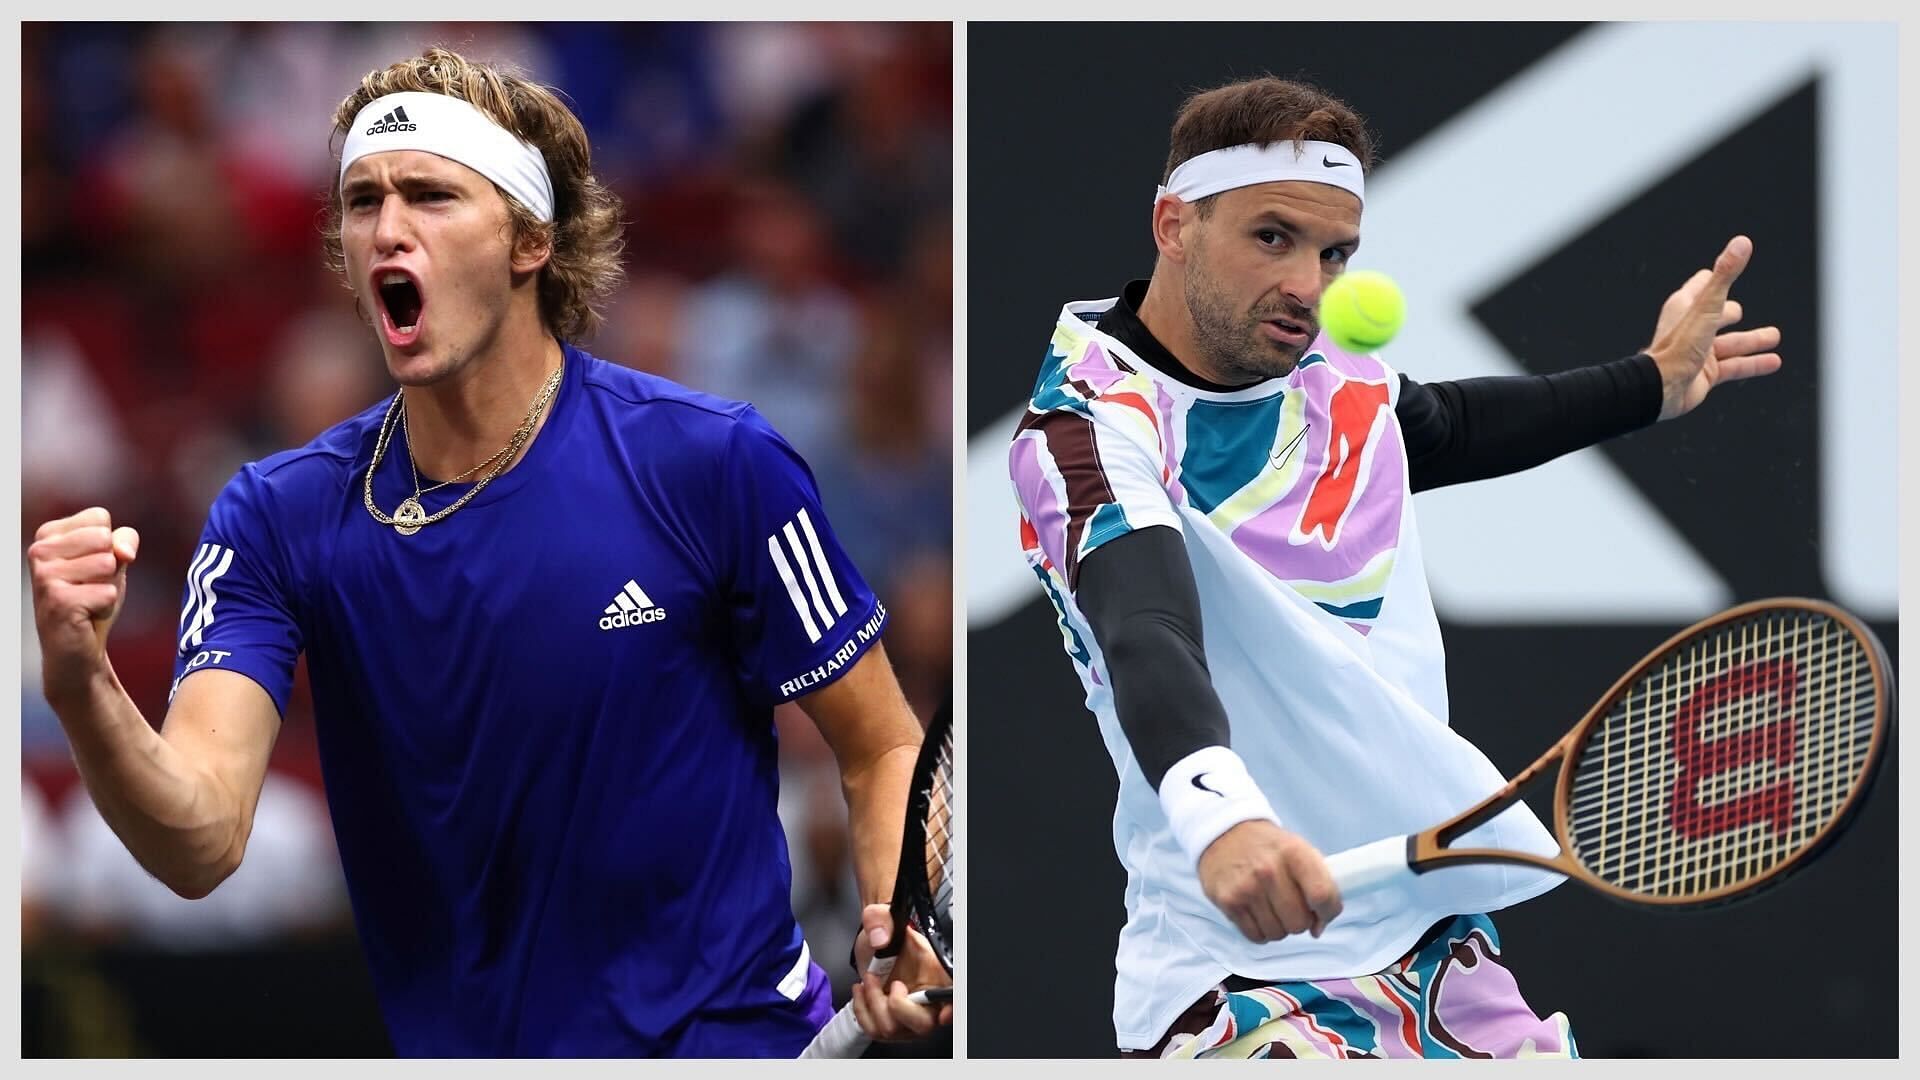 Alexander Zverev vs Grigor Dimitrov is one of the third-round matches at the 2023 US Open.